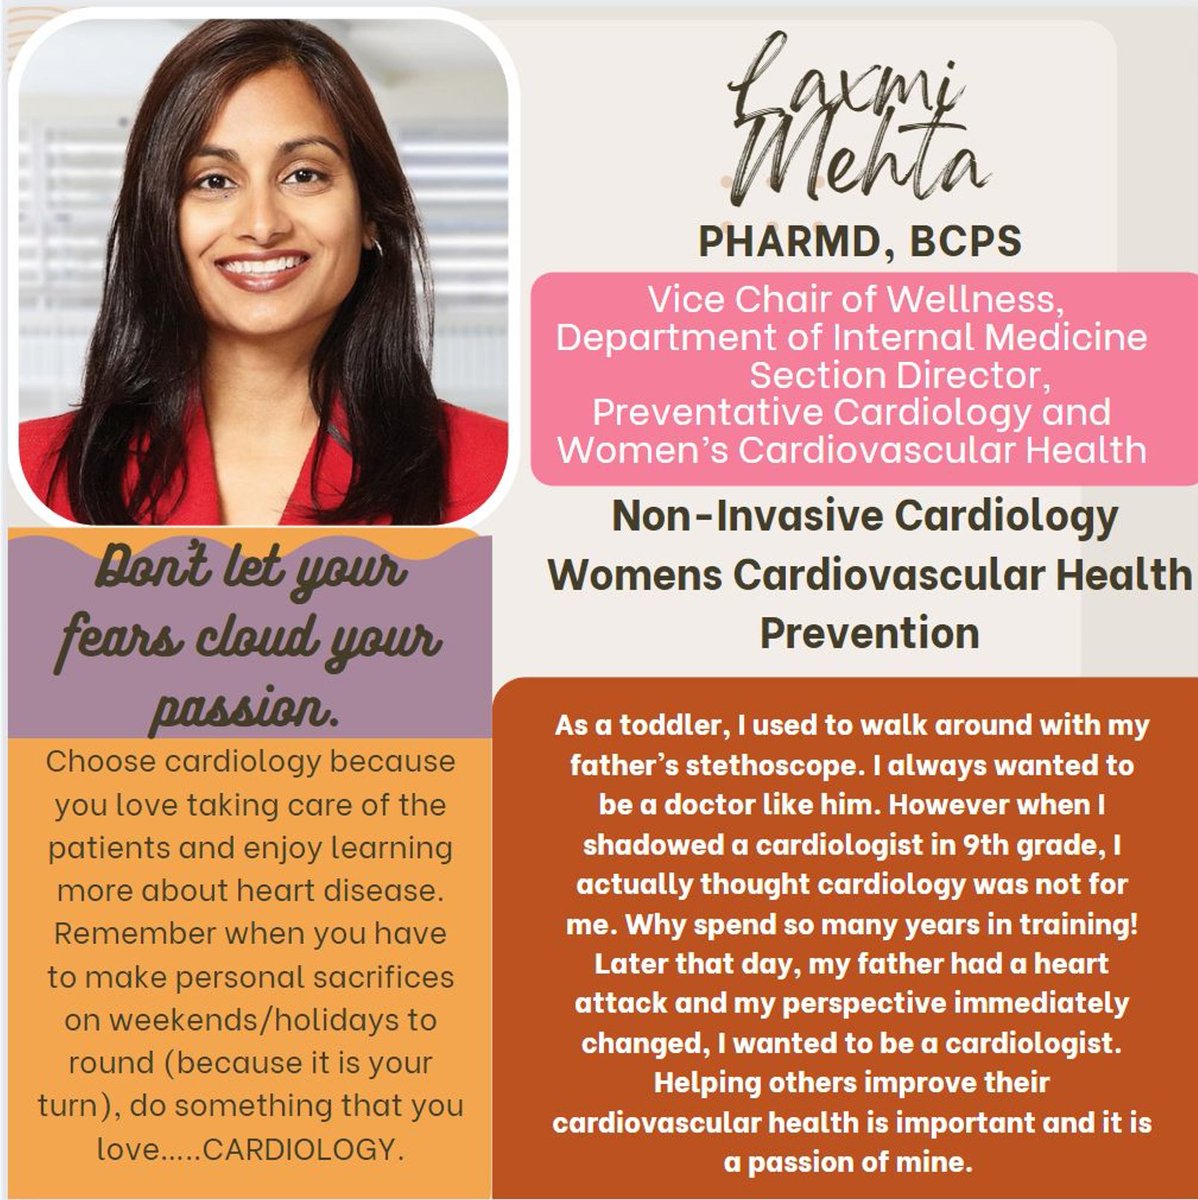 #WomensHistoryMonth #TheFaceofCardiology 

Don't let your fears cloud your passion!
@DrLaxmiMehta is a wonderful mentor and leader in #Cardiology. She has been leading the @ACCinTouch efforts for #ClinicianWellbeing, which is needed now more than ever!

@ditchhaporia @WomenAs1